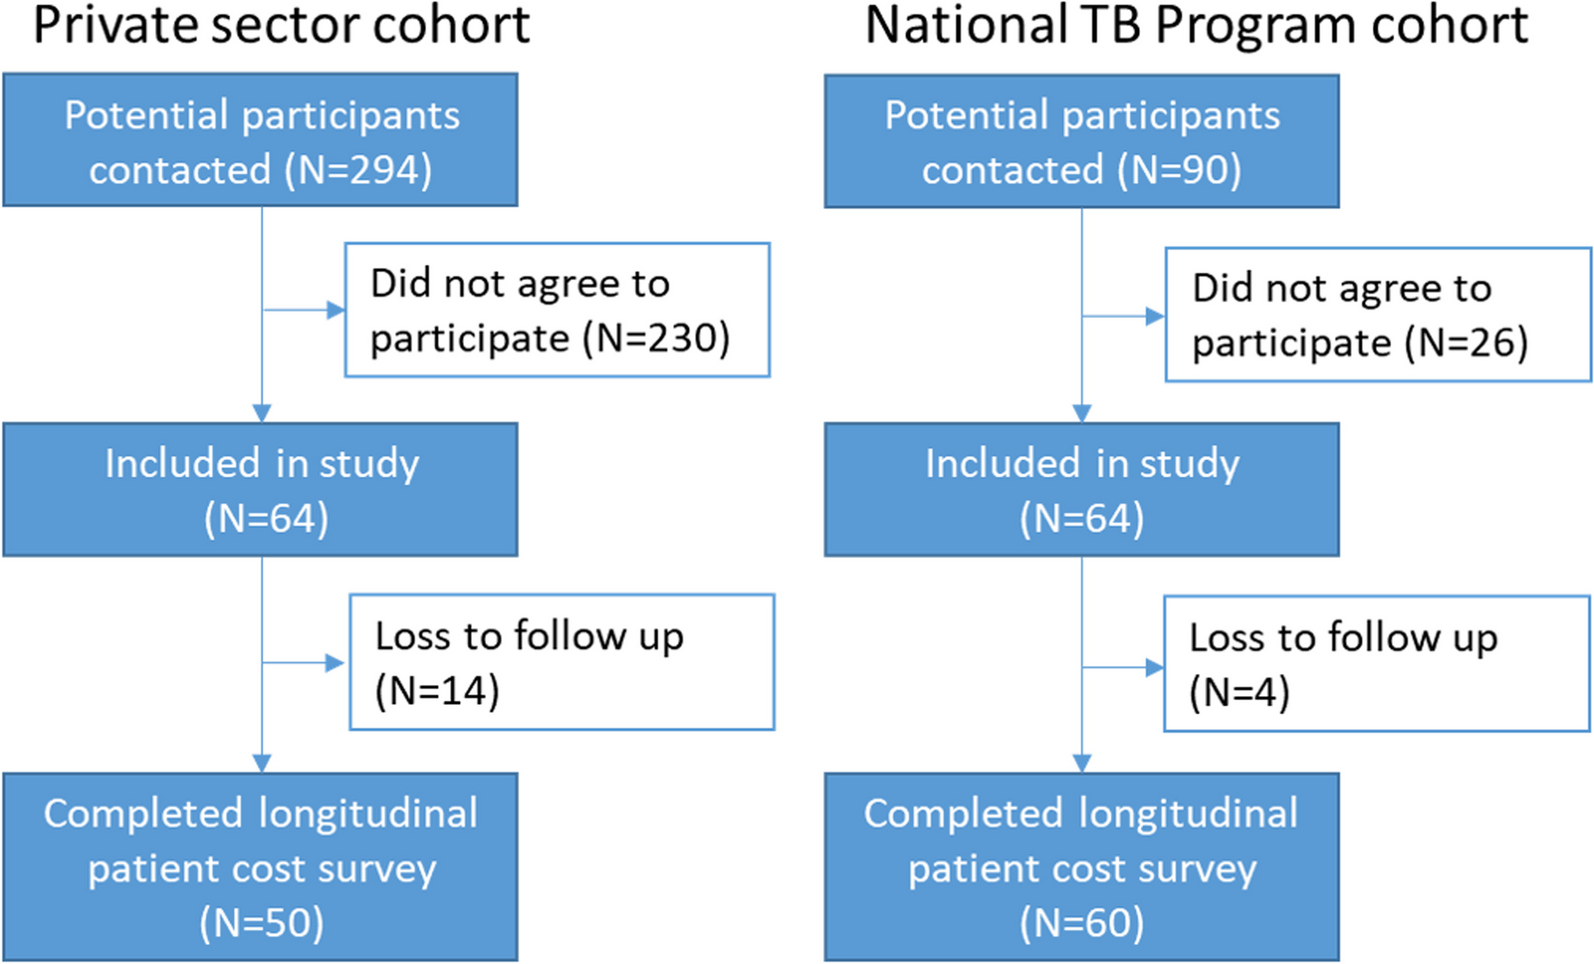 Is convenience really king? Comparative evaluation of catastrophic costs due to tuberculosis in the public and private healthcare sectors of Viet Nam: a longitudinal patient cost study